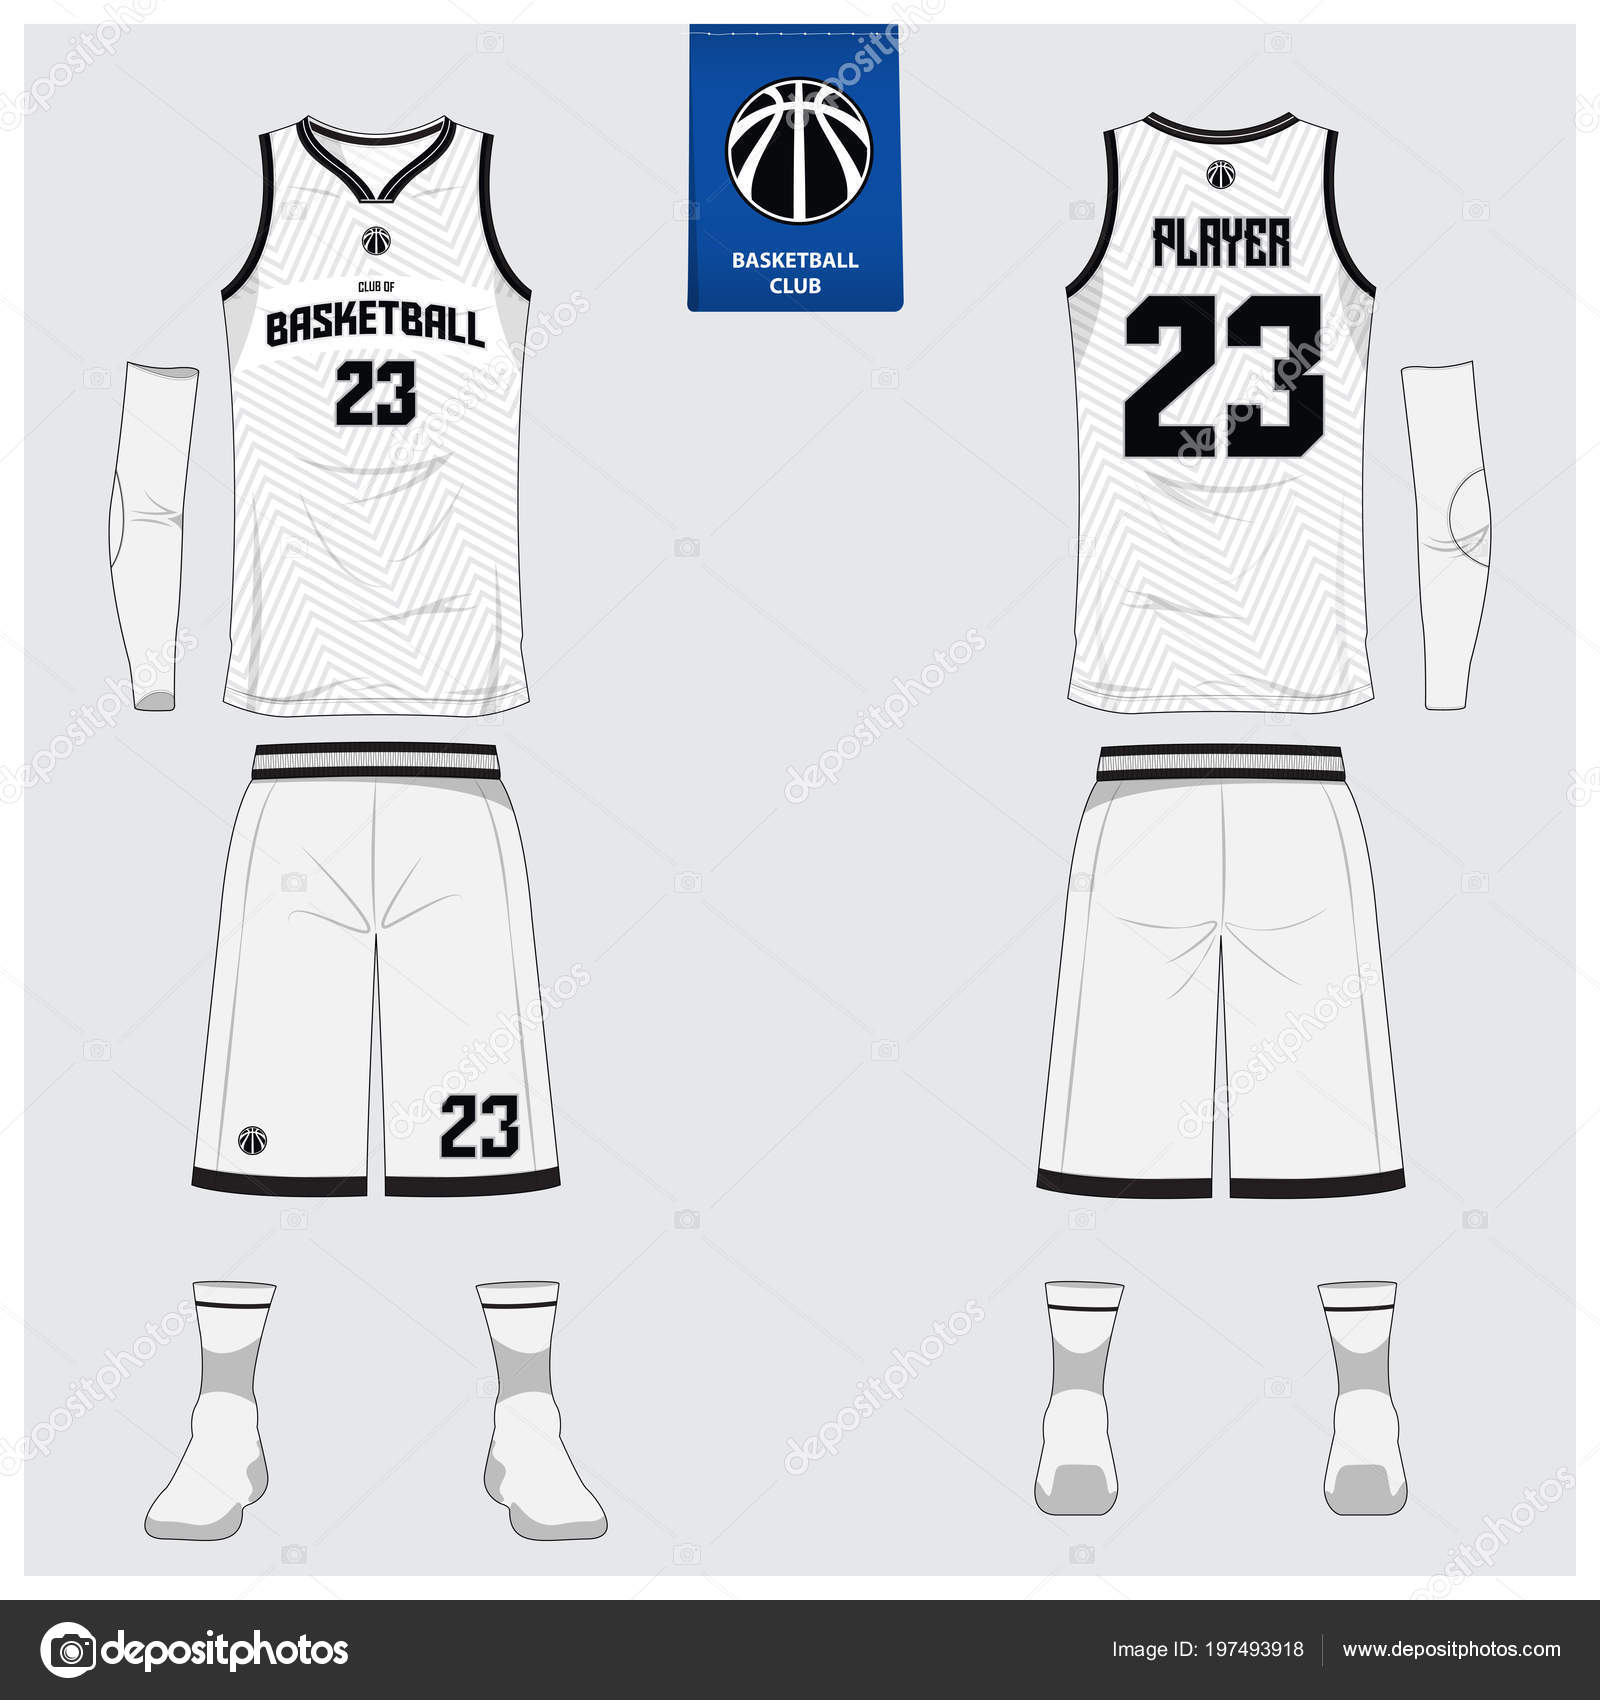 22,22 Basketball jersey template Vector Images, Basketball jersey Pertaining To Blank Basketball Uniform Template